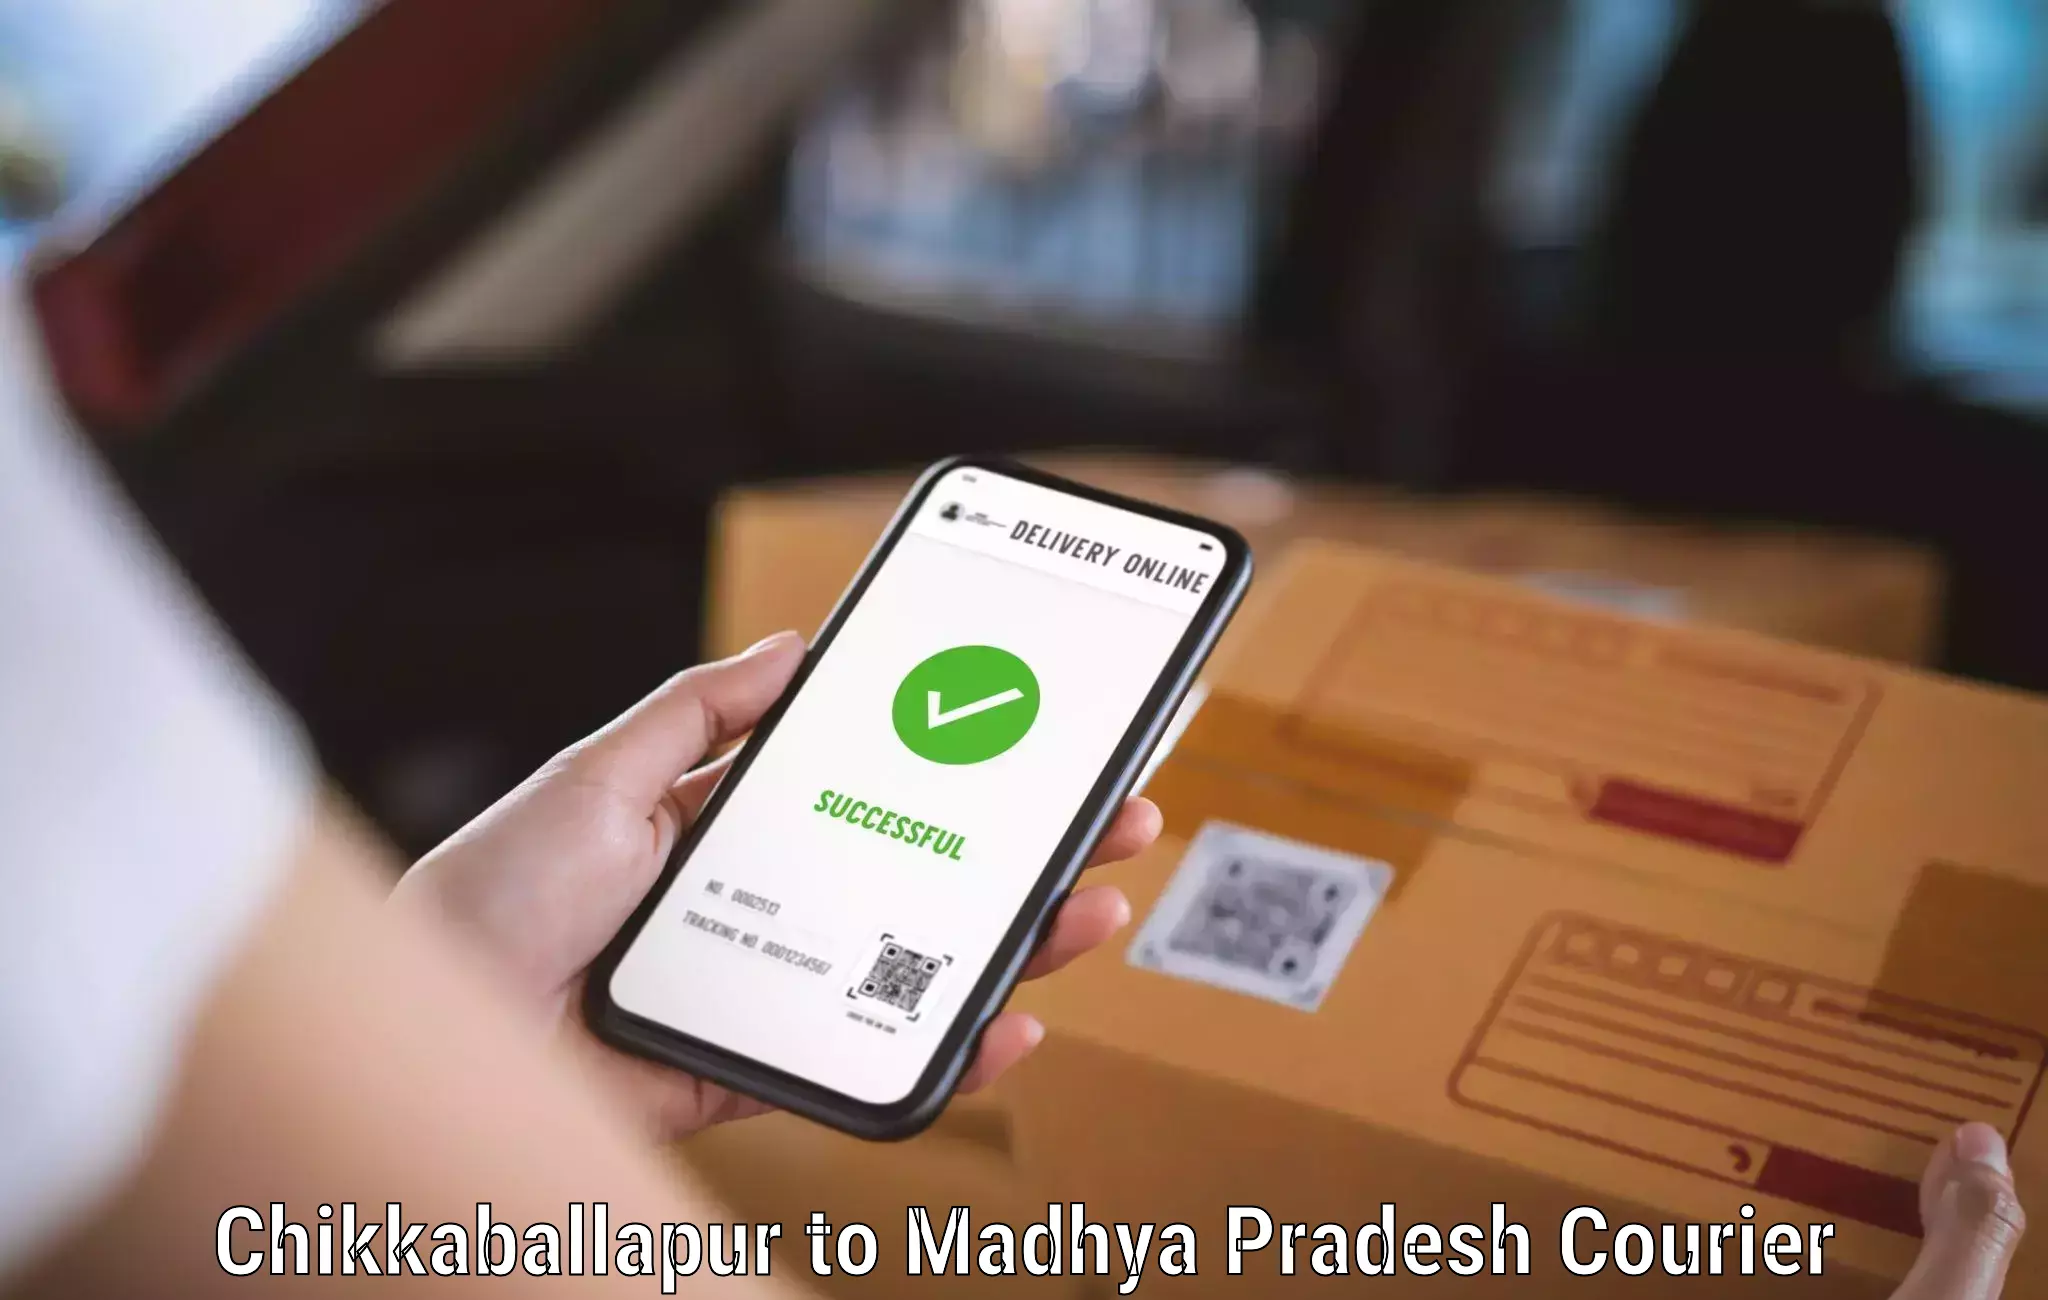 State-of-the-art courier technology Chikkaballapur to Datia